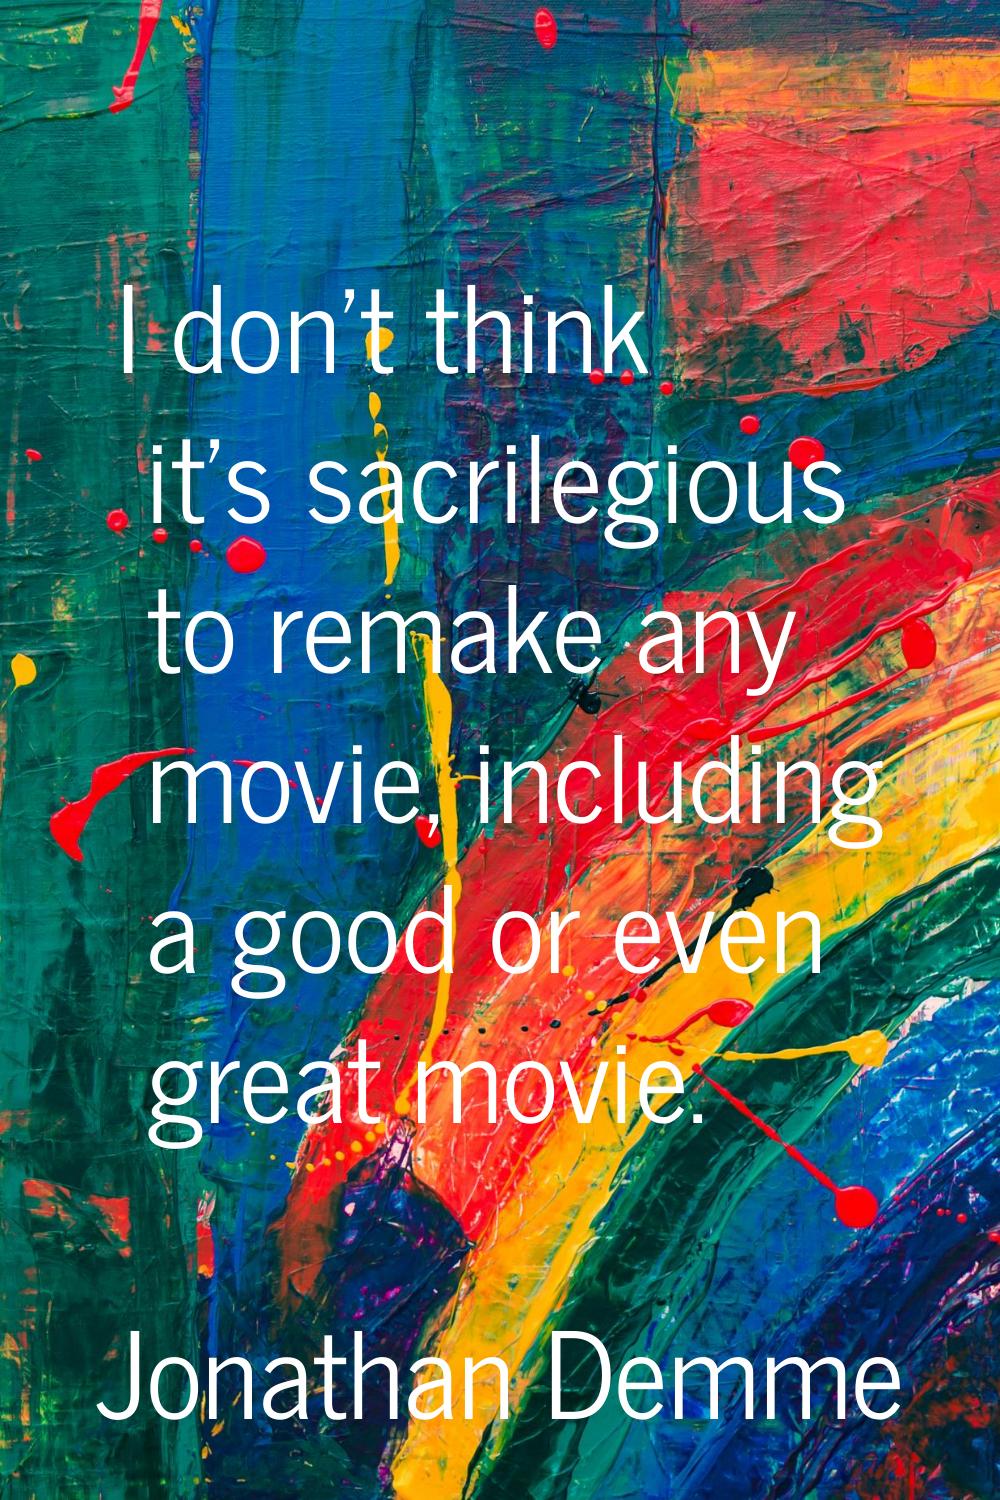 I don't think it's sacrilegious to remake any movie, including a good or even great movie.